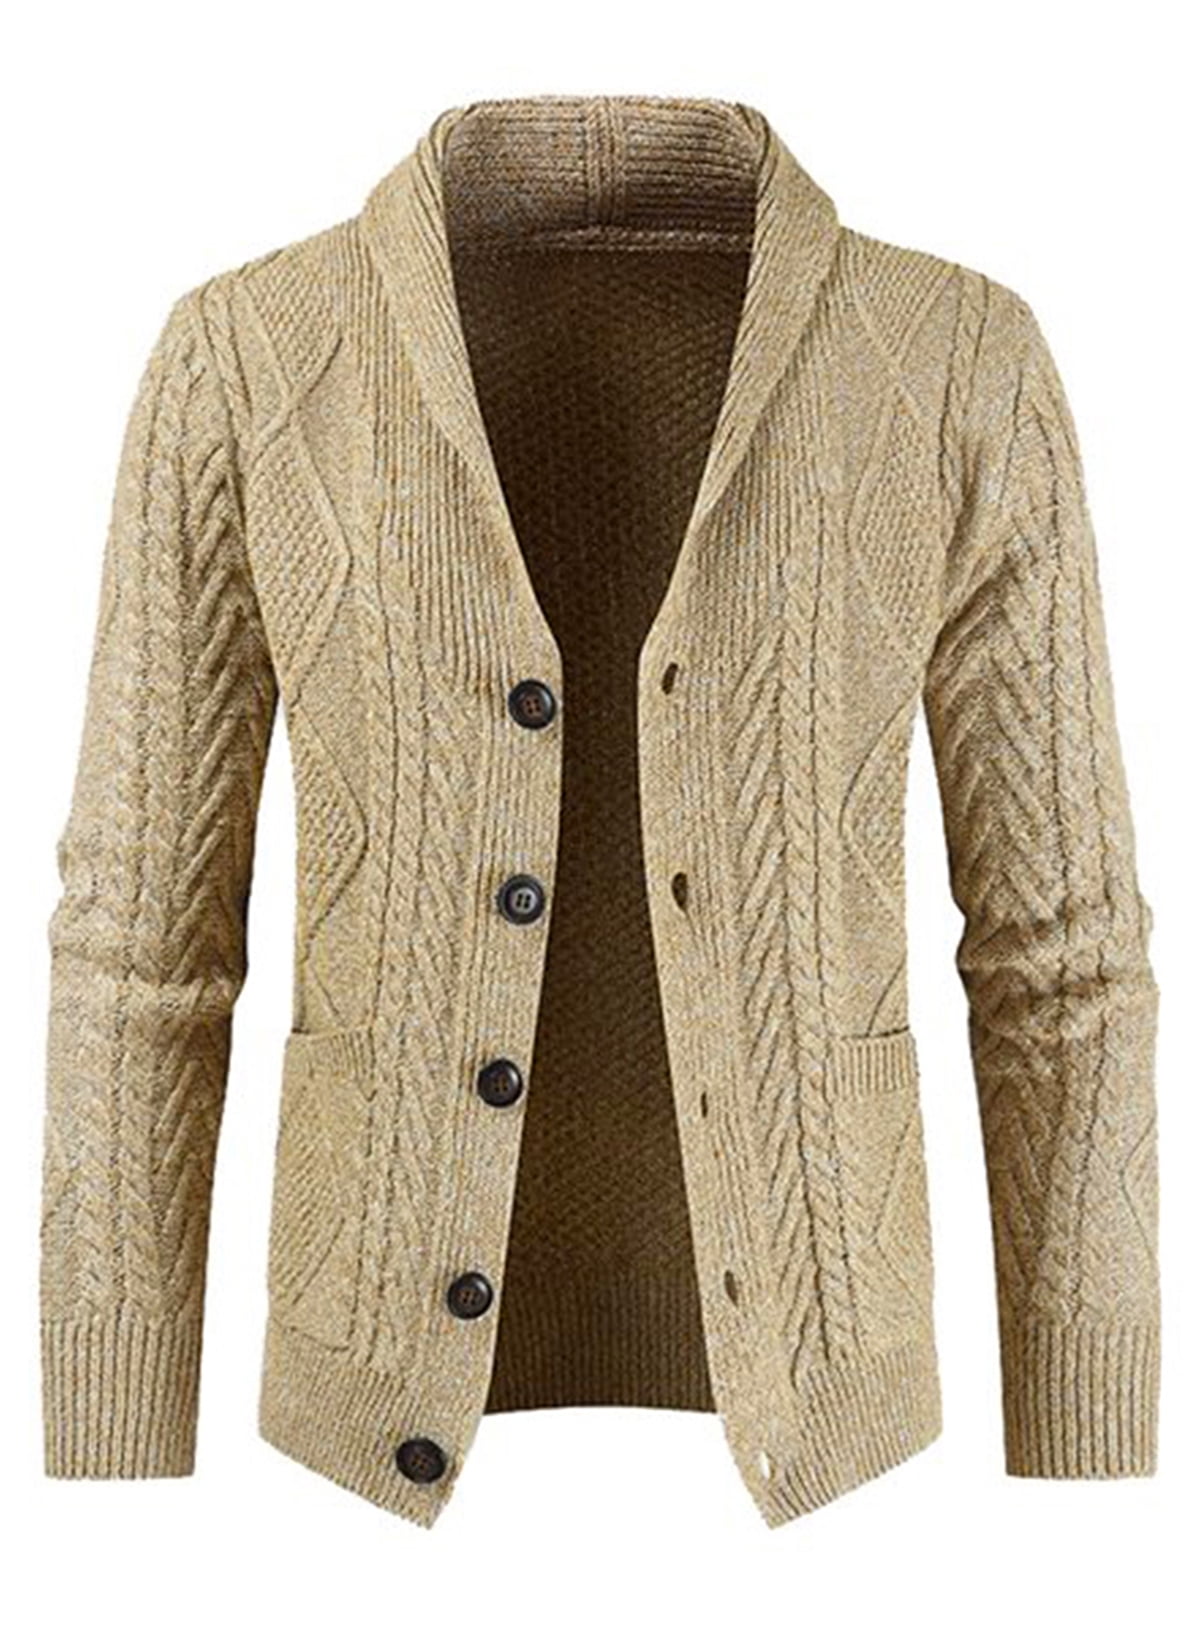 JMIERR Mens Casual Long Sleeve Cardigan Sweaters Cable Knit Buttons ...